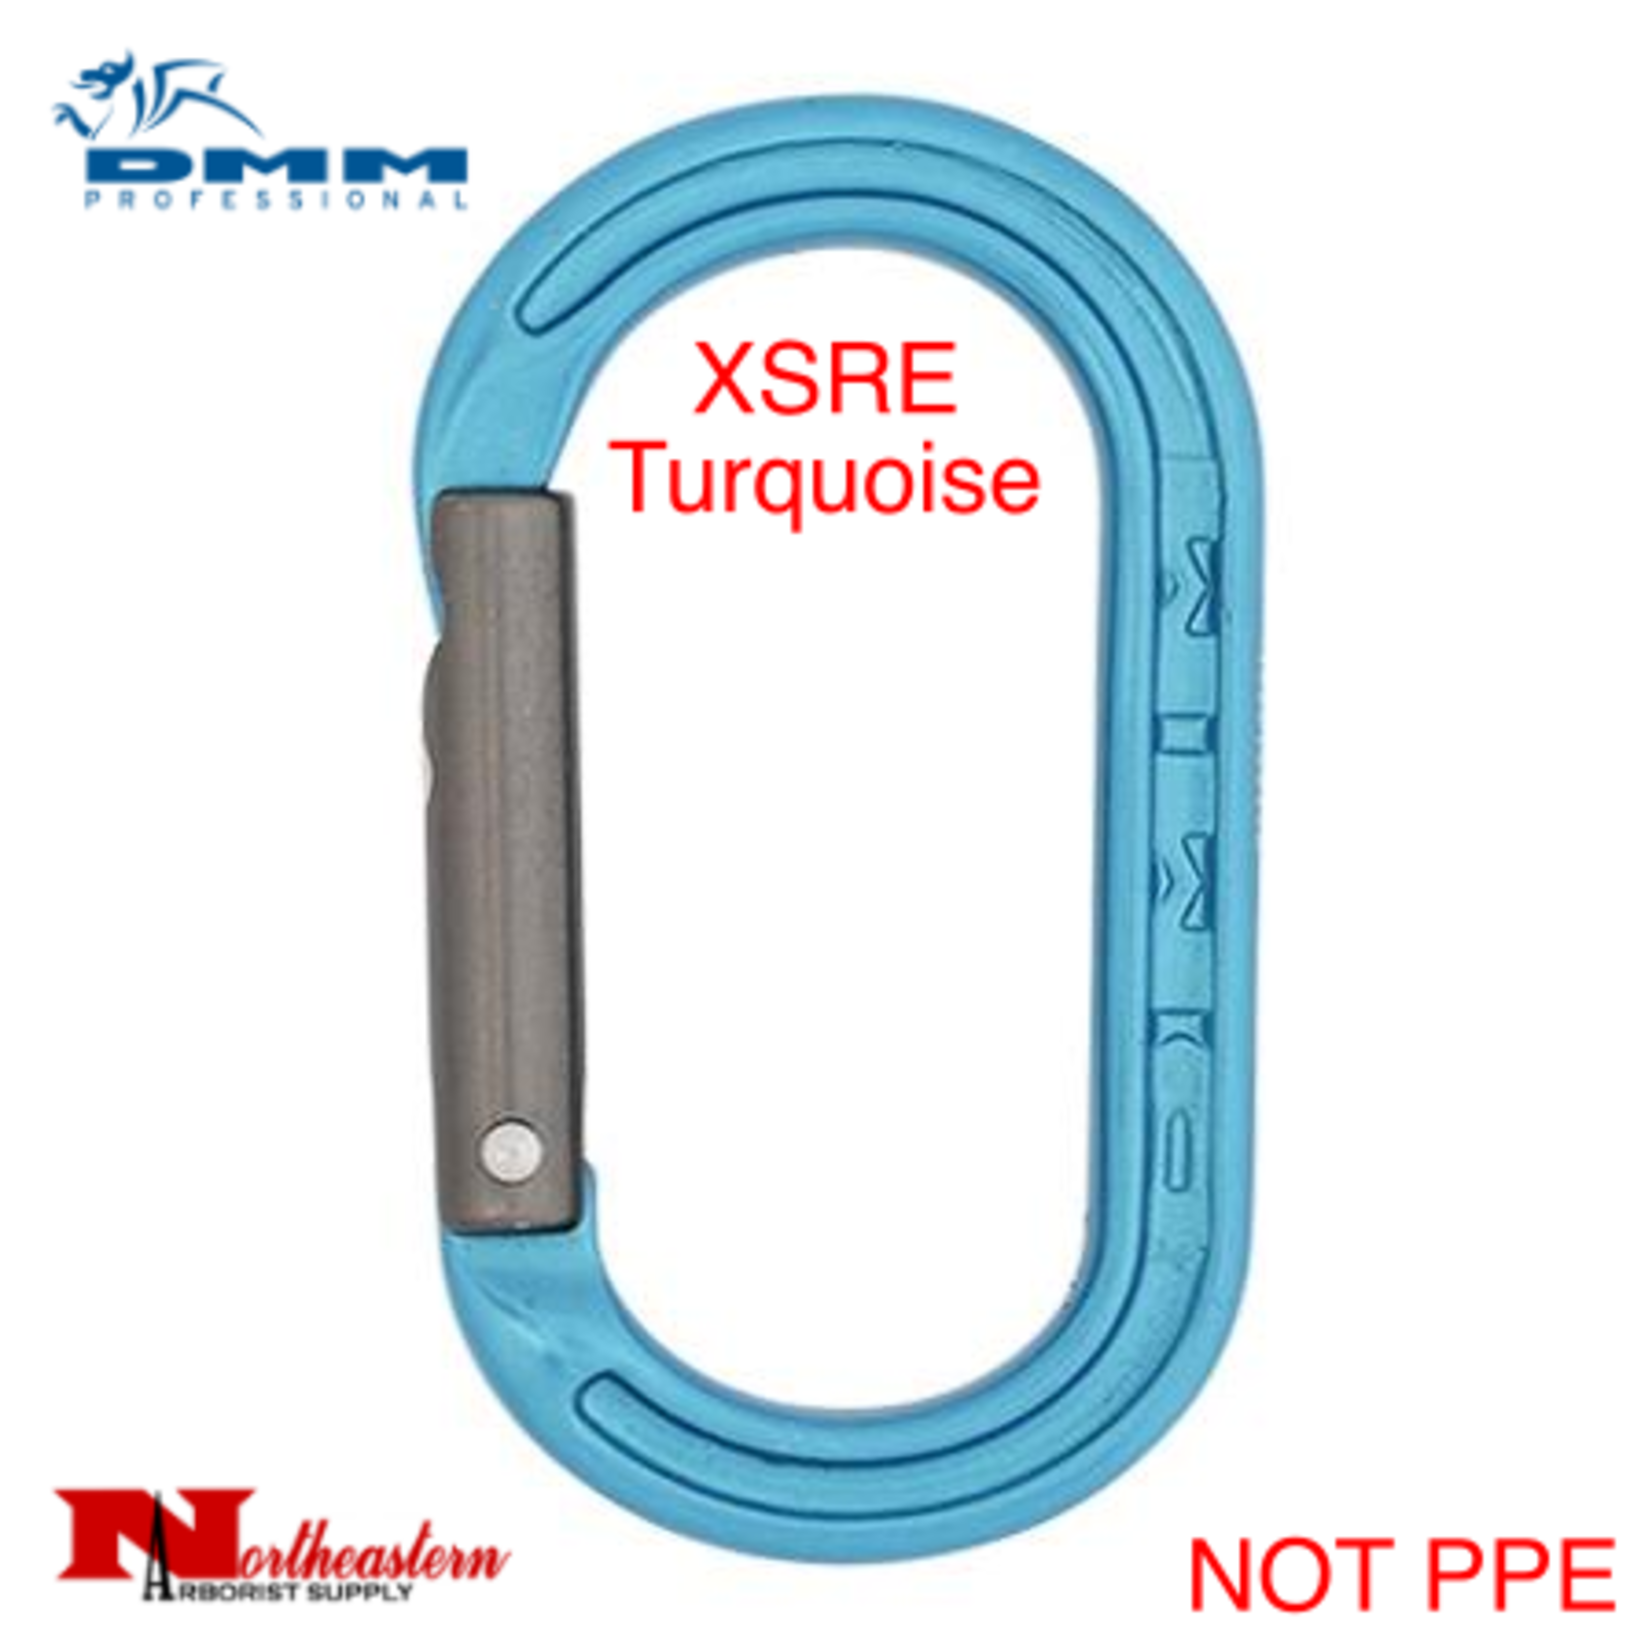 DMM Xsre Mini Carabiner Turquoise